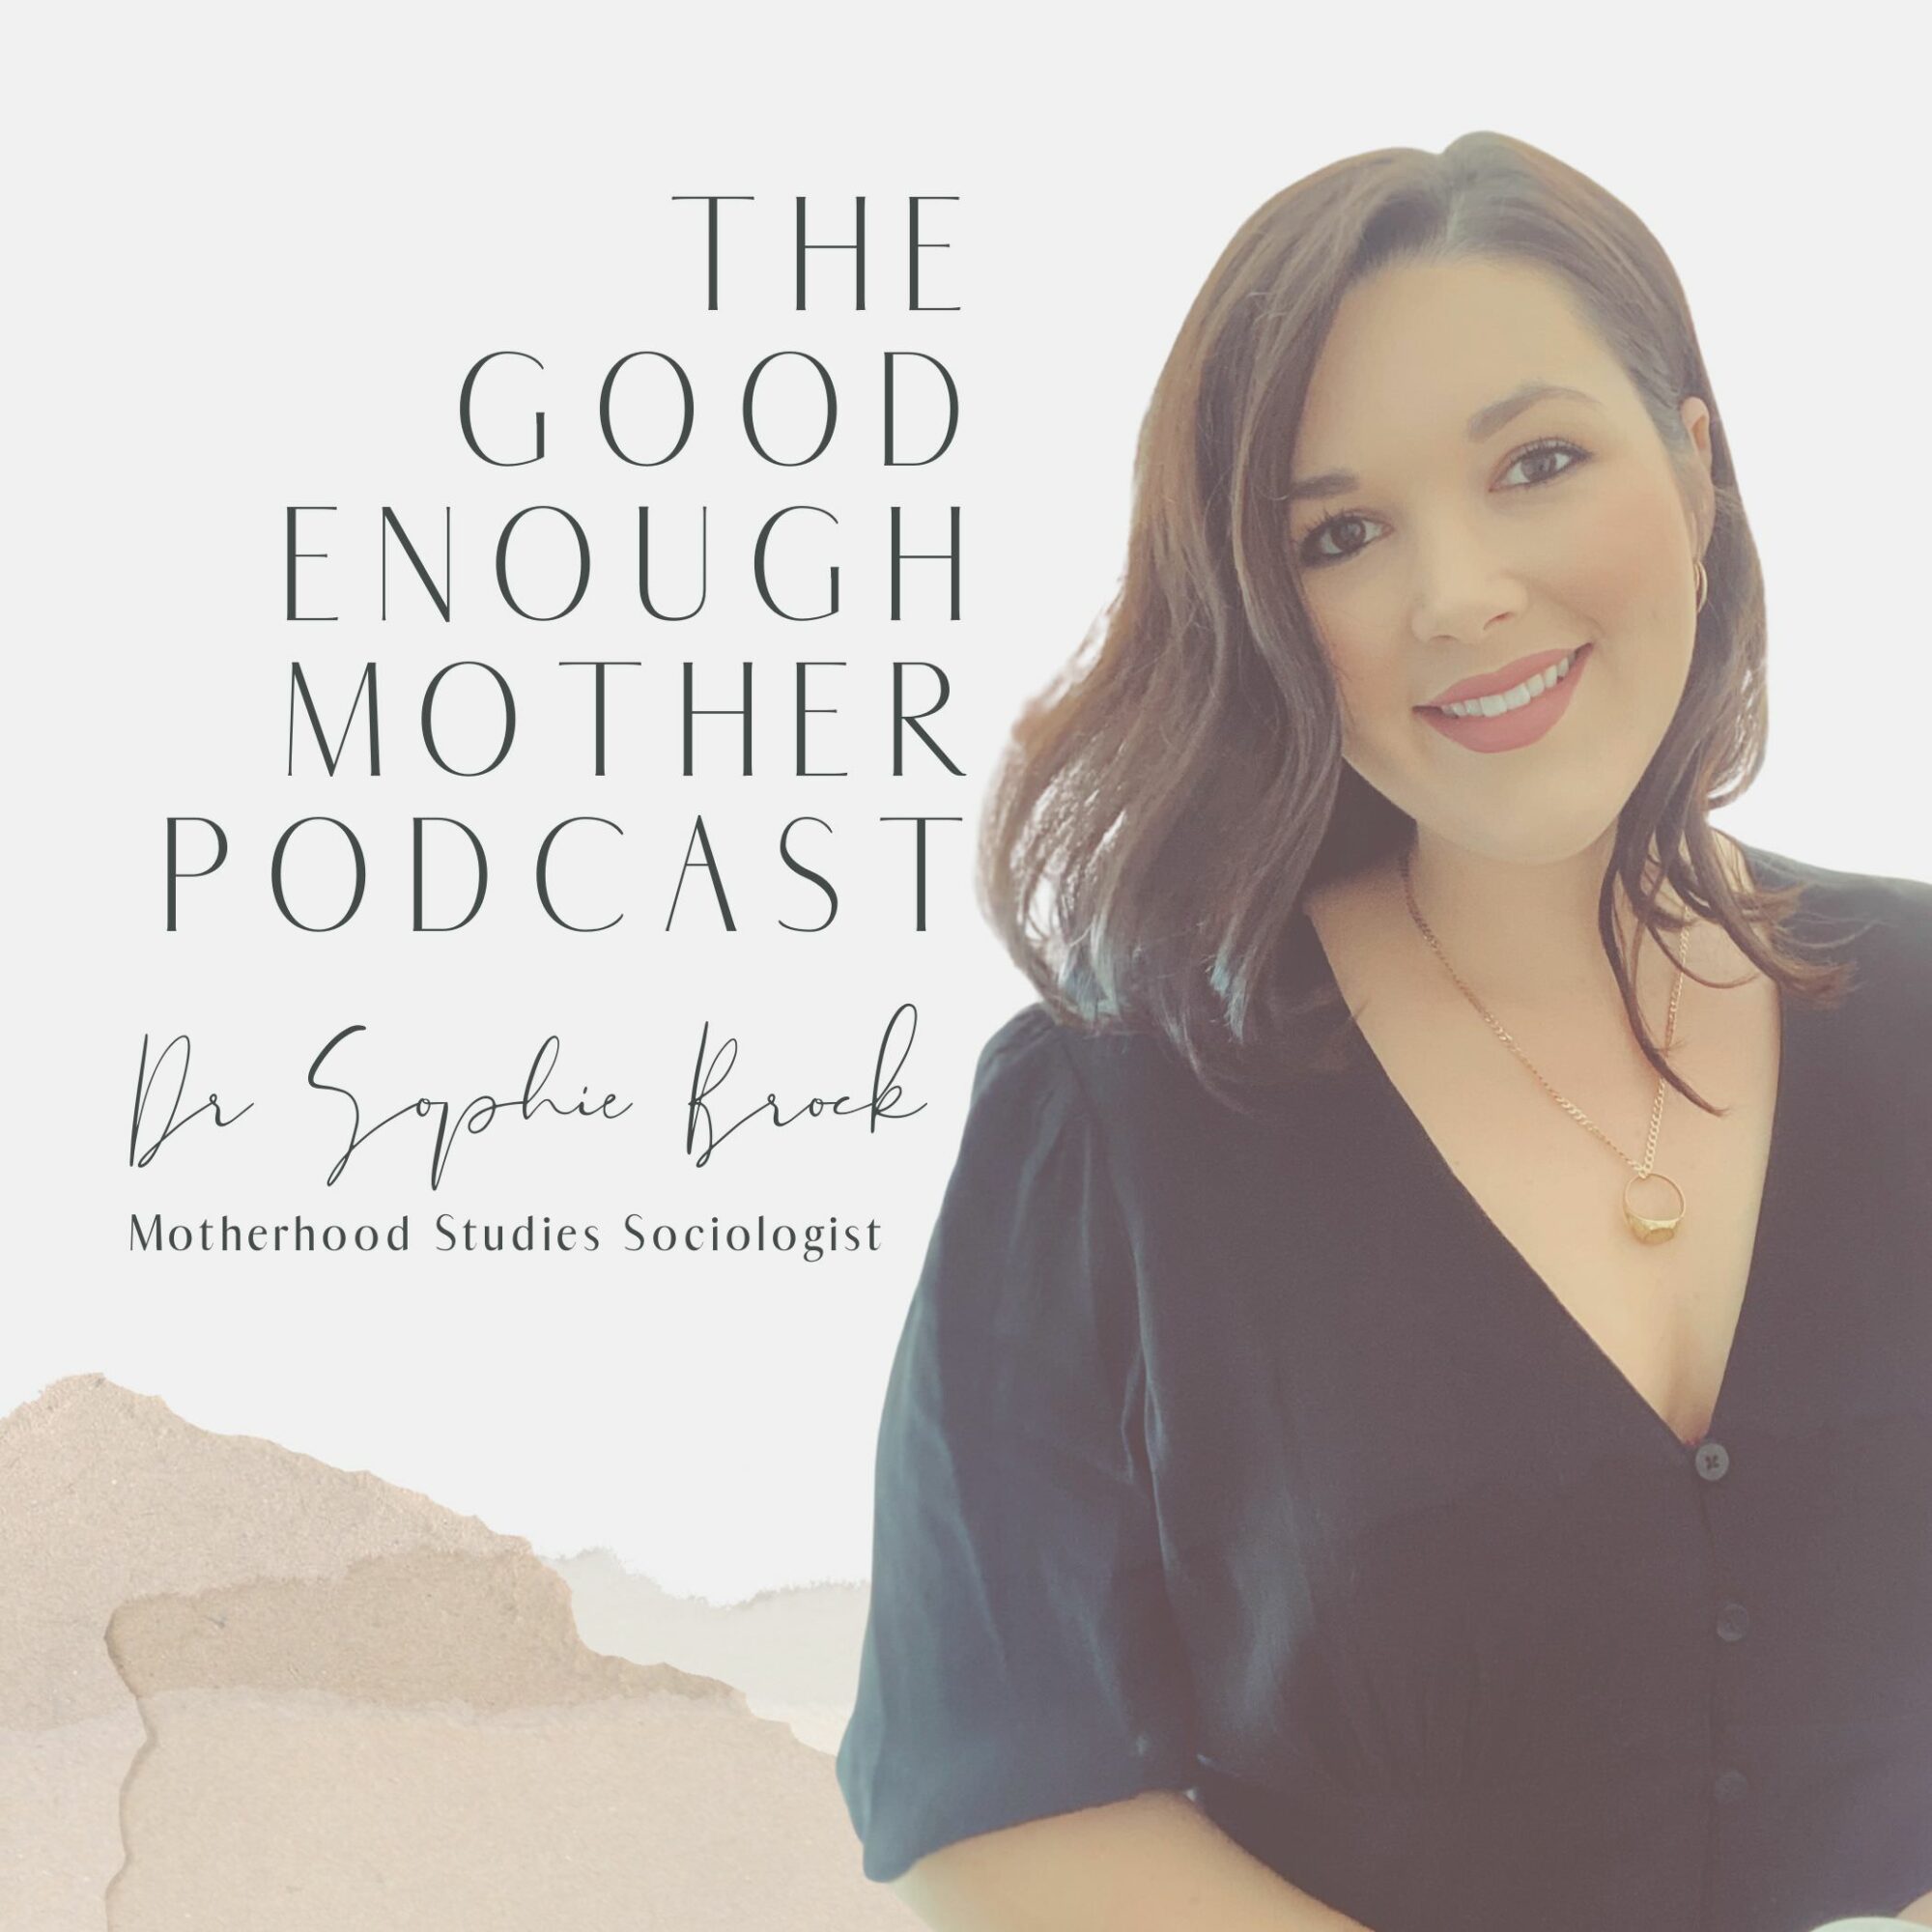 the good enough mother with dr sophie brock